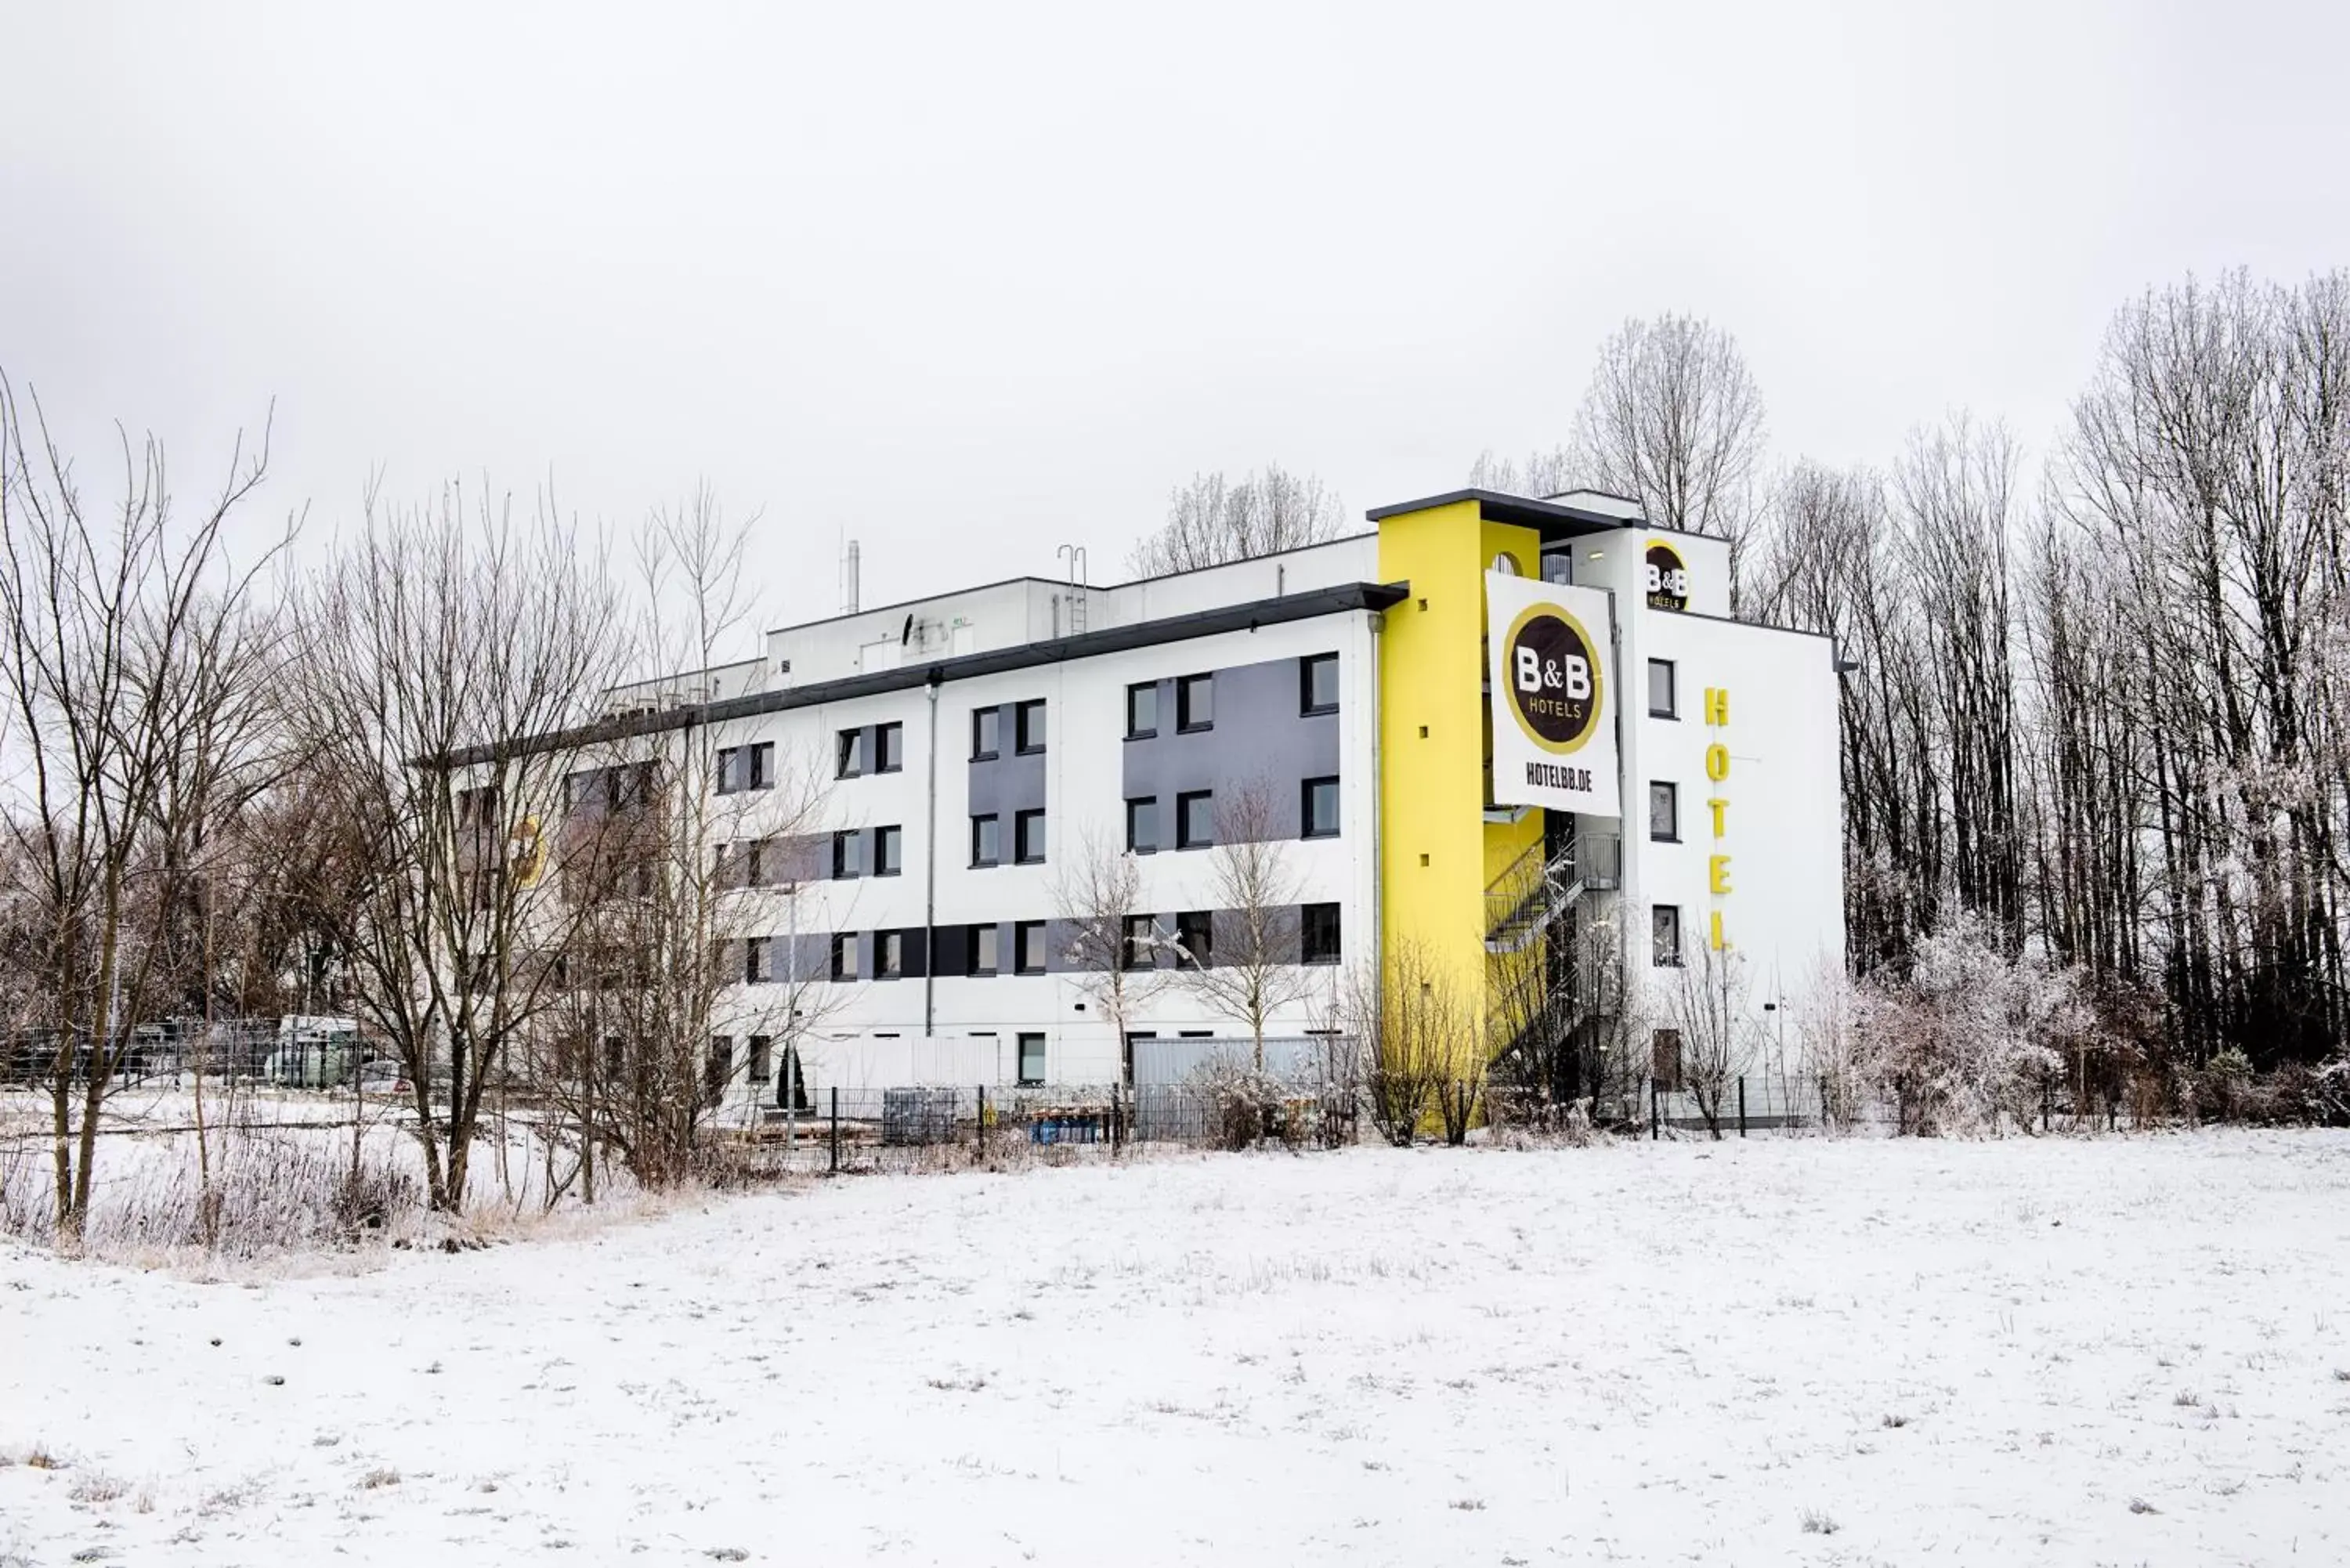 Property building, Winter in B&B Hotel München Airport